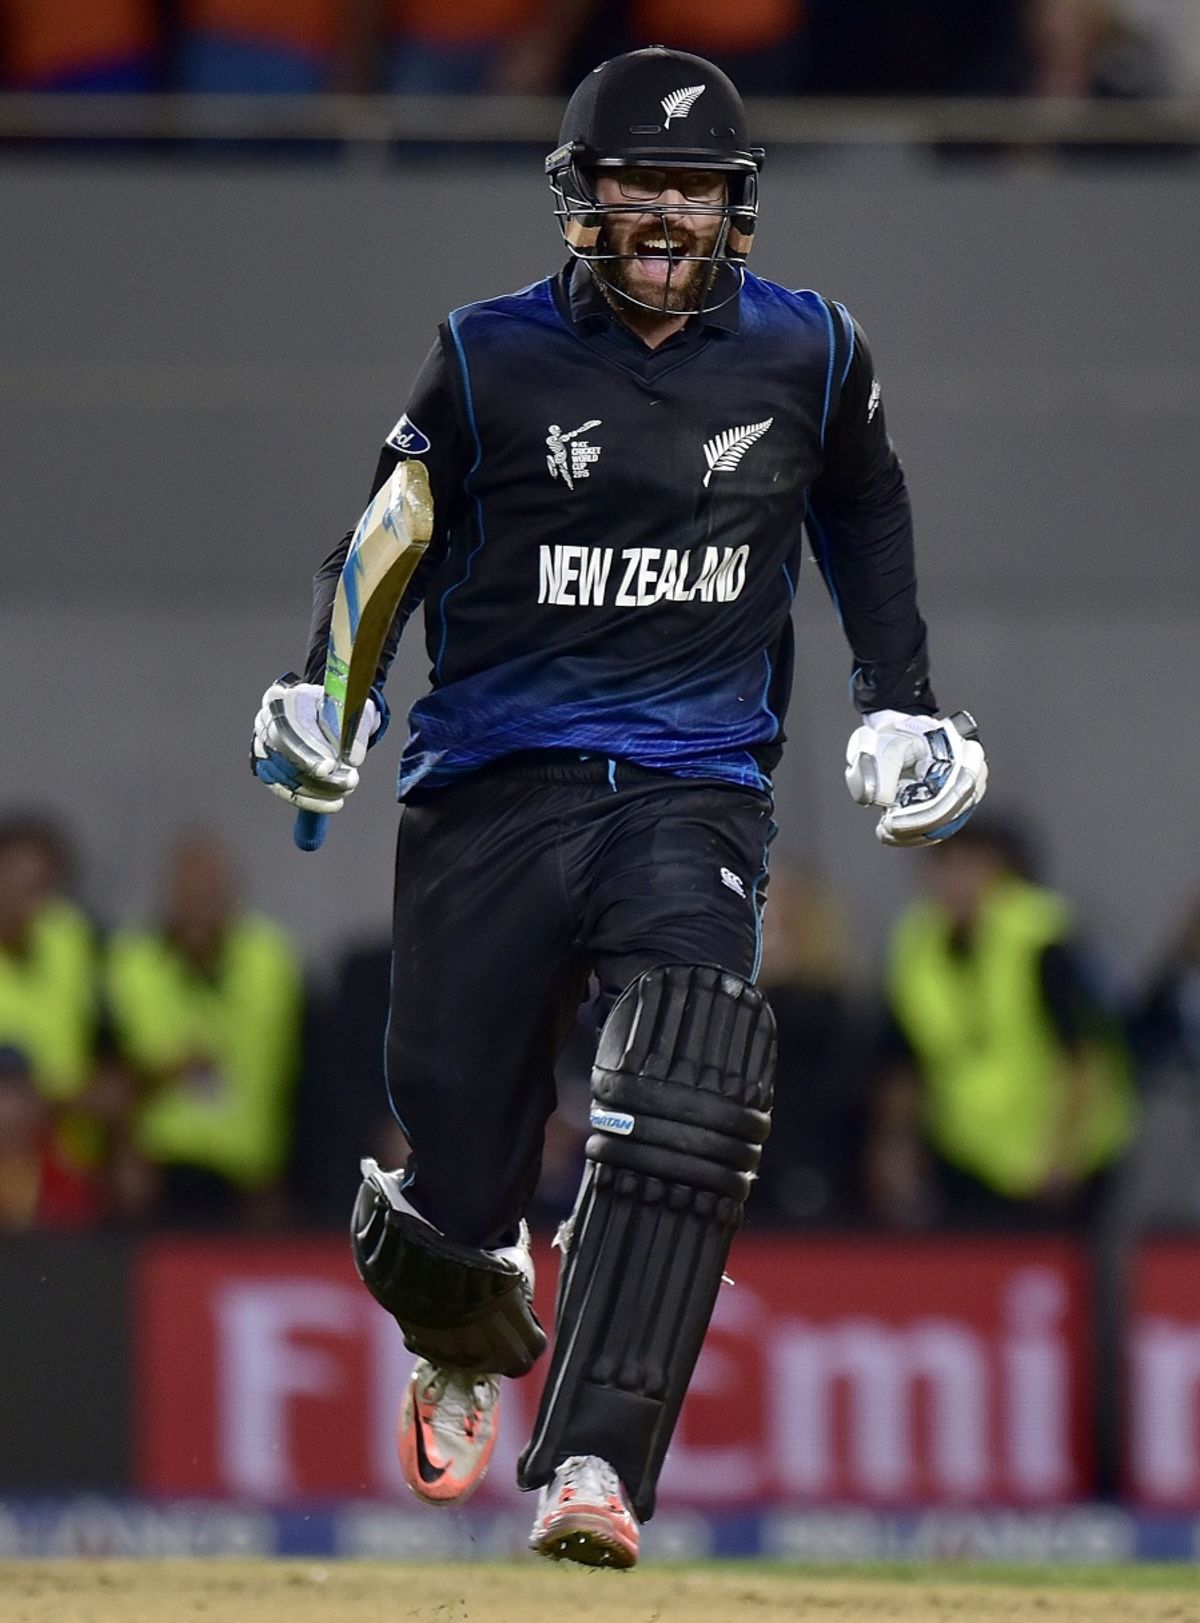 Daniel Vettori is pumped after New Zealand's stunning win, New Zealand v South Africa, World Cup 2015, 1st Semi-Final, Auckland, March 24, 2015